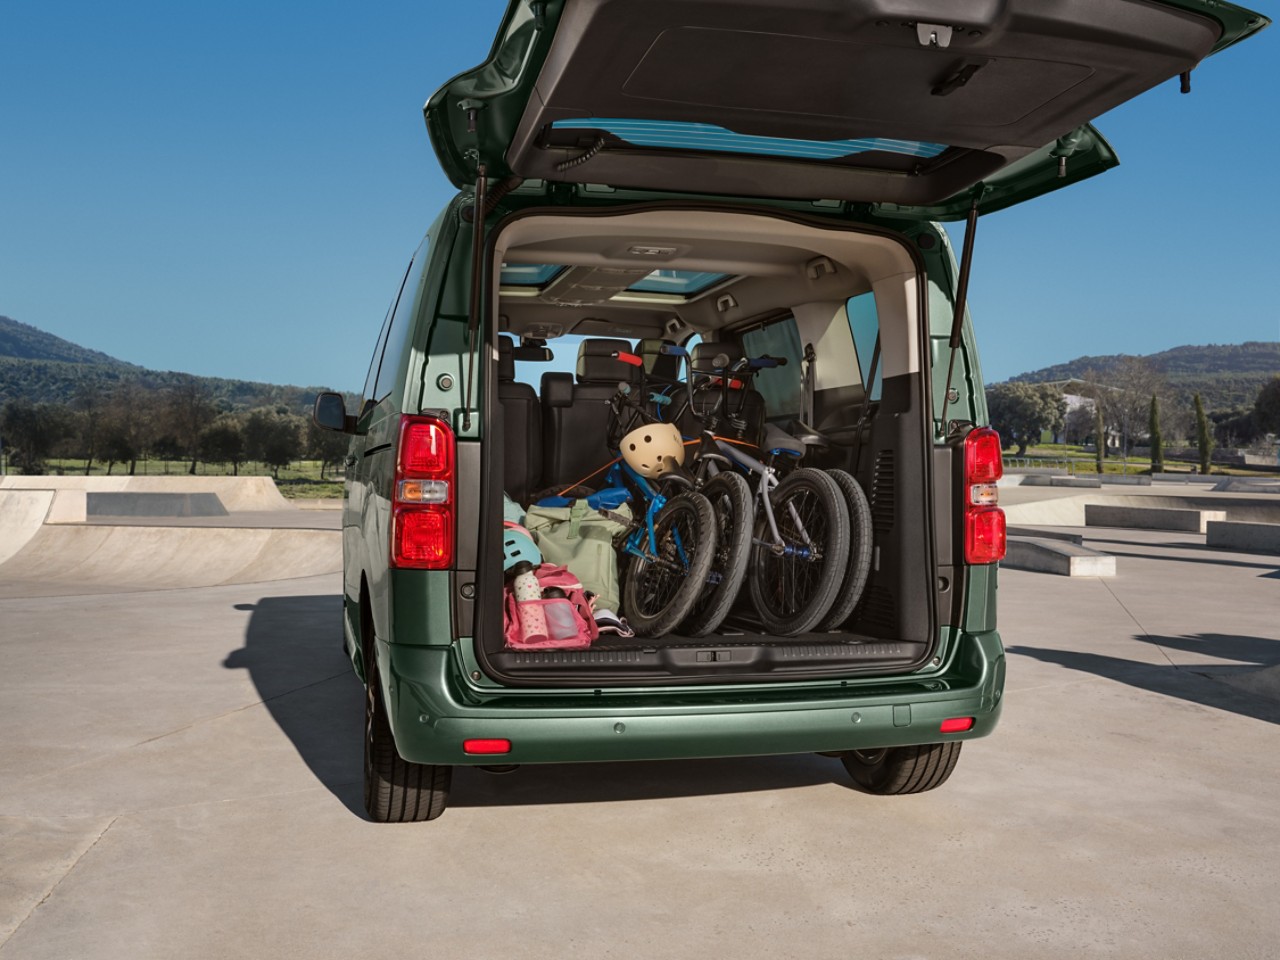 A Proace Verso loaded with bikes and luggage